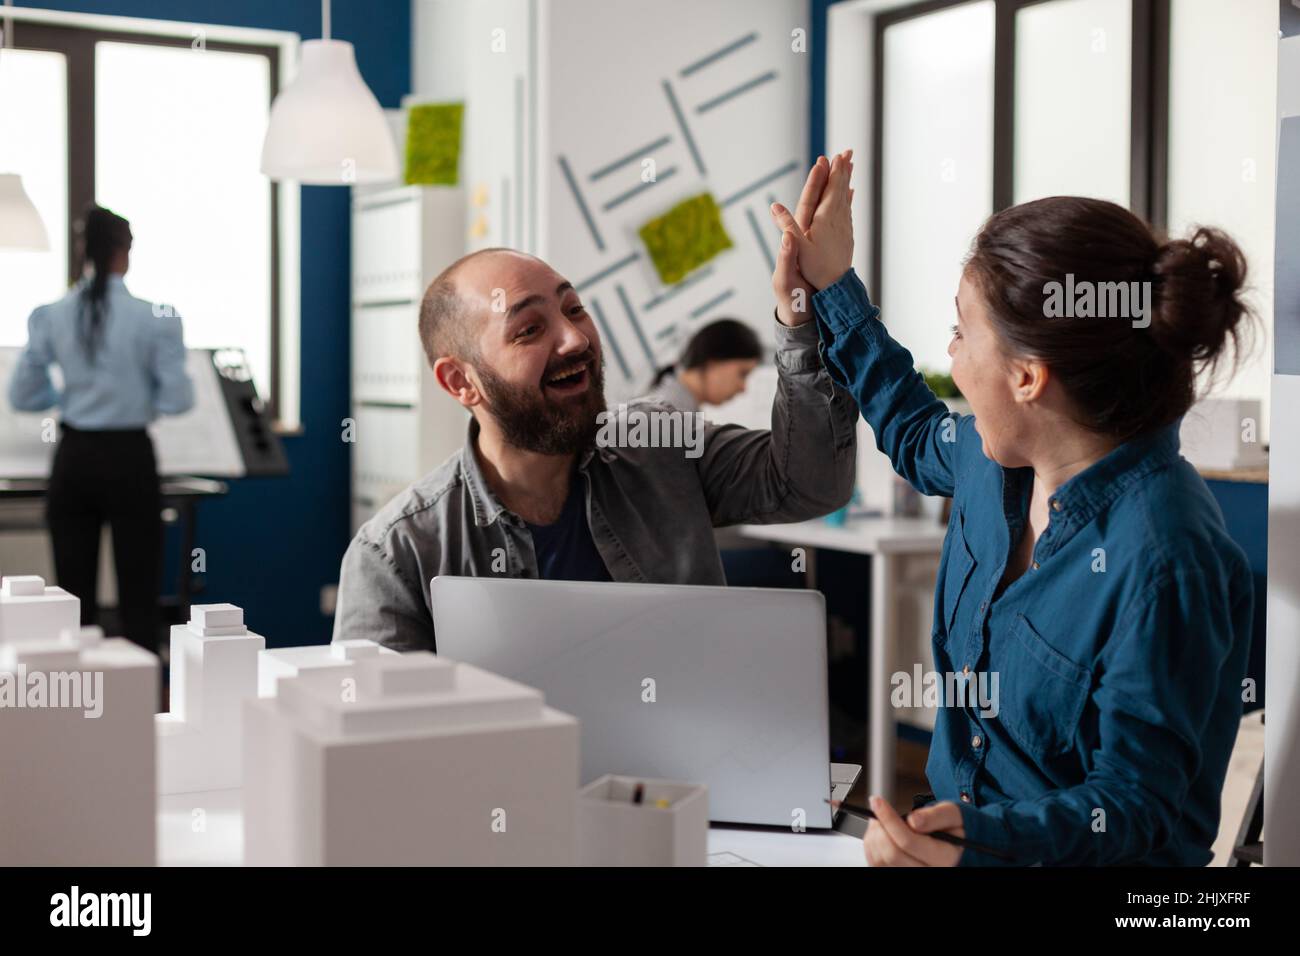 Two architects high fiving sitting at desk in architectural modern office with laptop and foam scale model of residential buildings. Successful happy smiling colleagues celebrating team project. Stock Photo